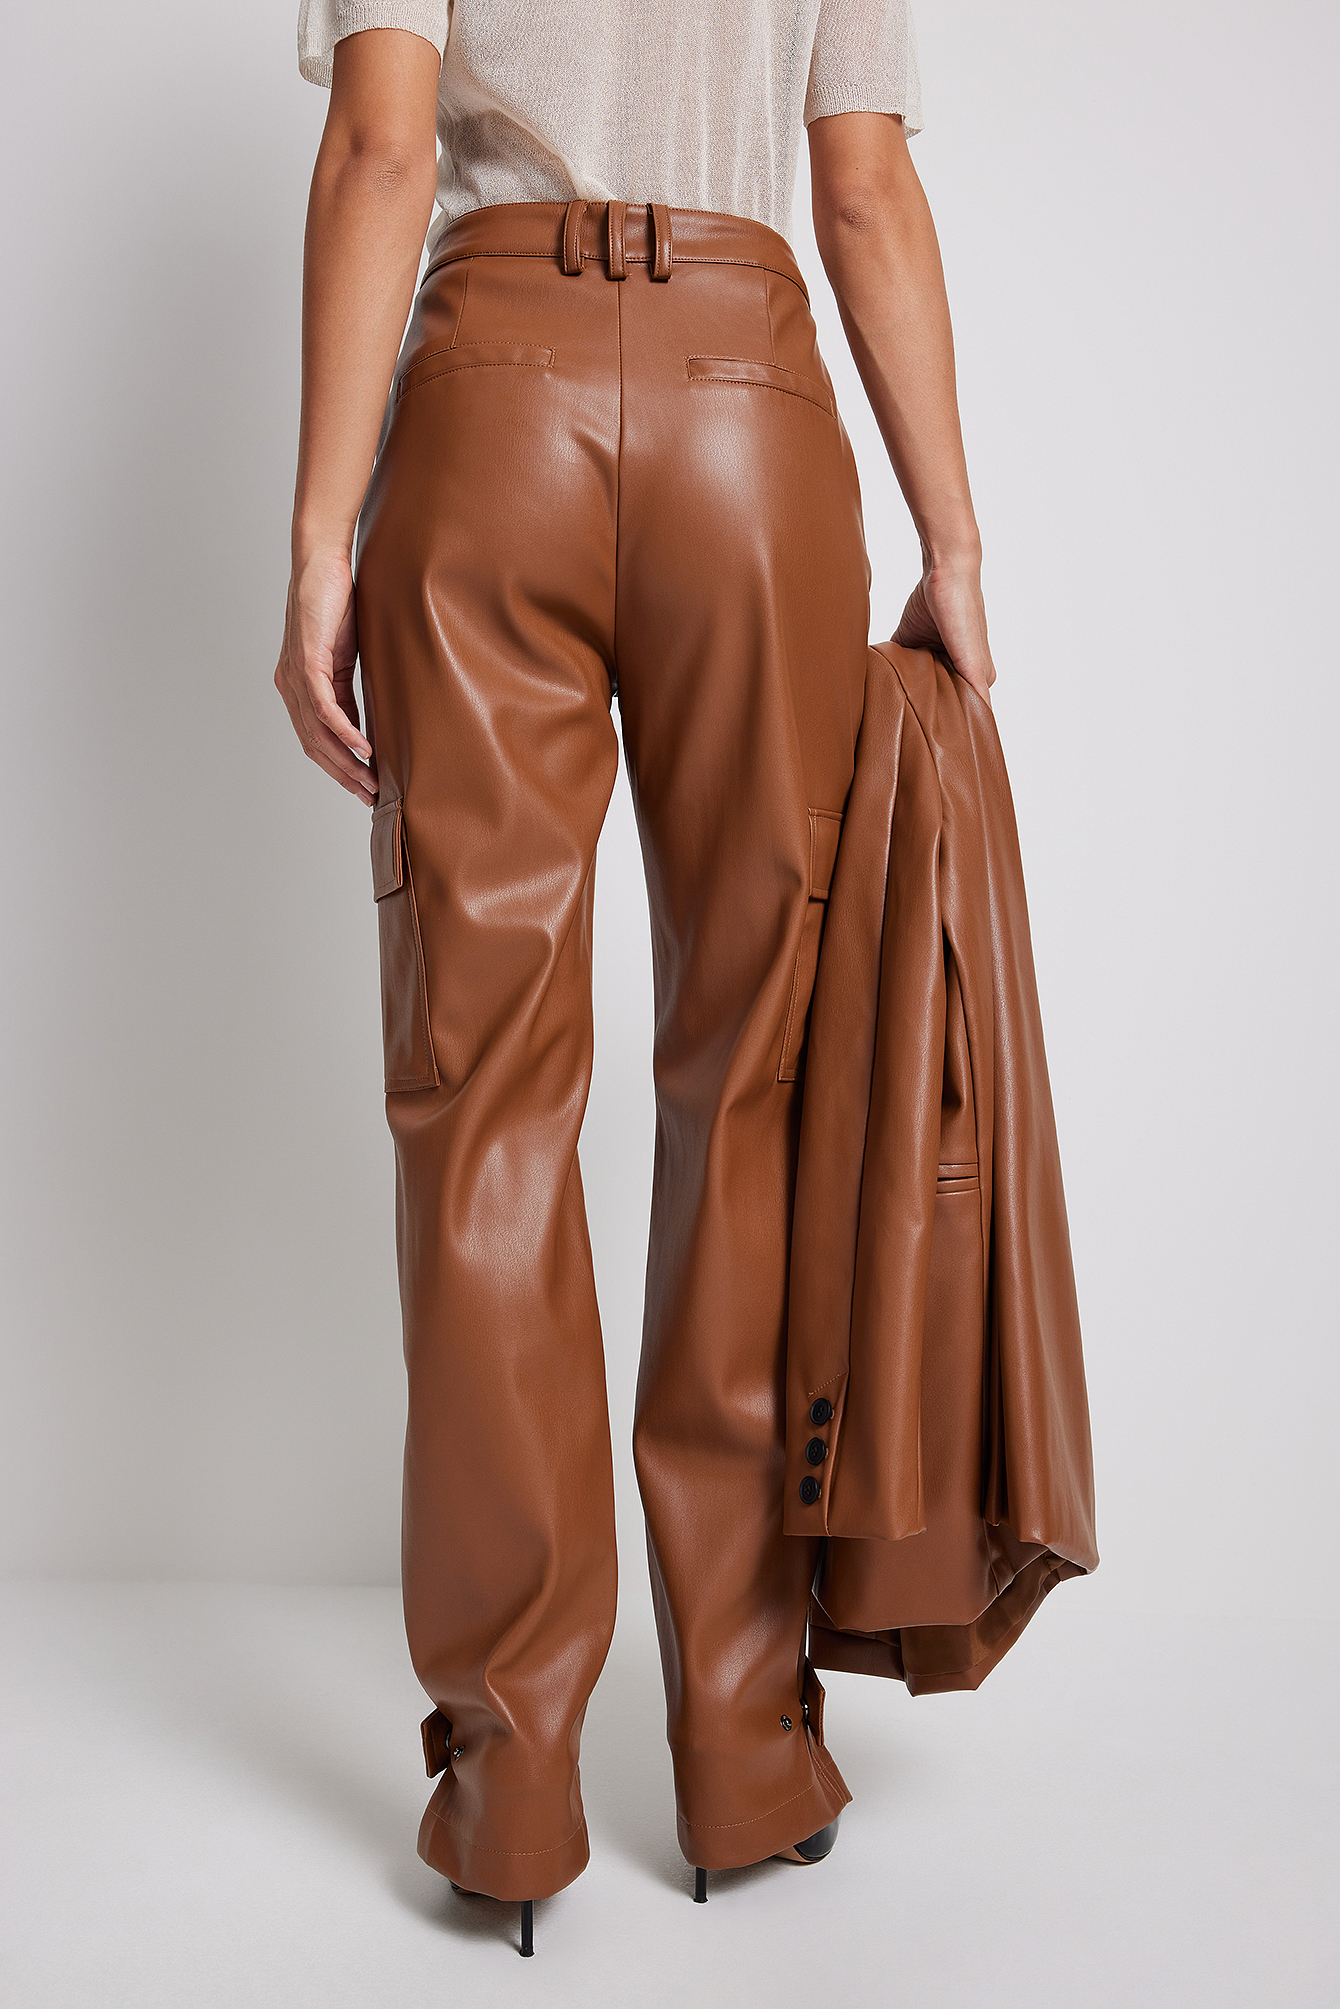 15 Best Brown leather pants ideas  brown leather pants autumn fashion leather  pants outfit